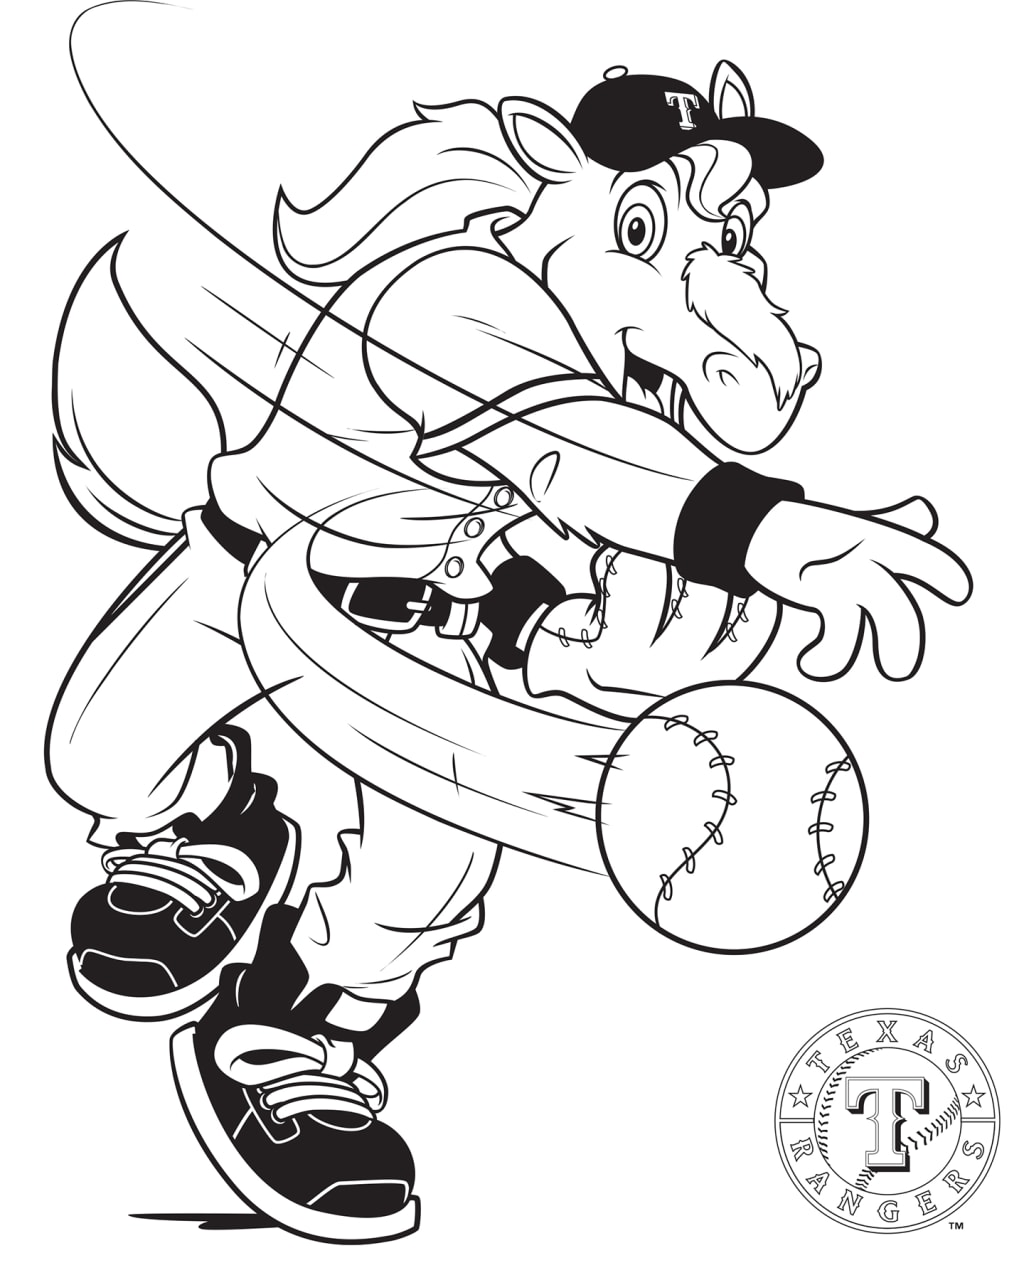 Rangers Captain Coloring Page 2  Coloring pages, Ranger, Texas